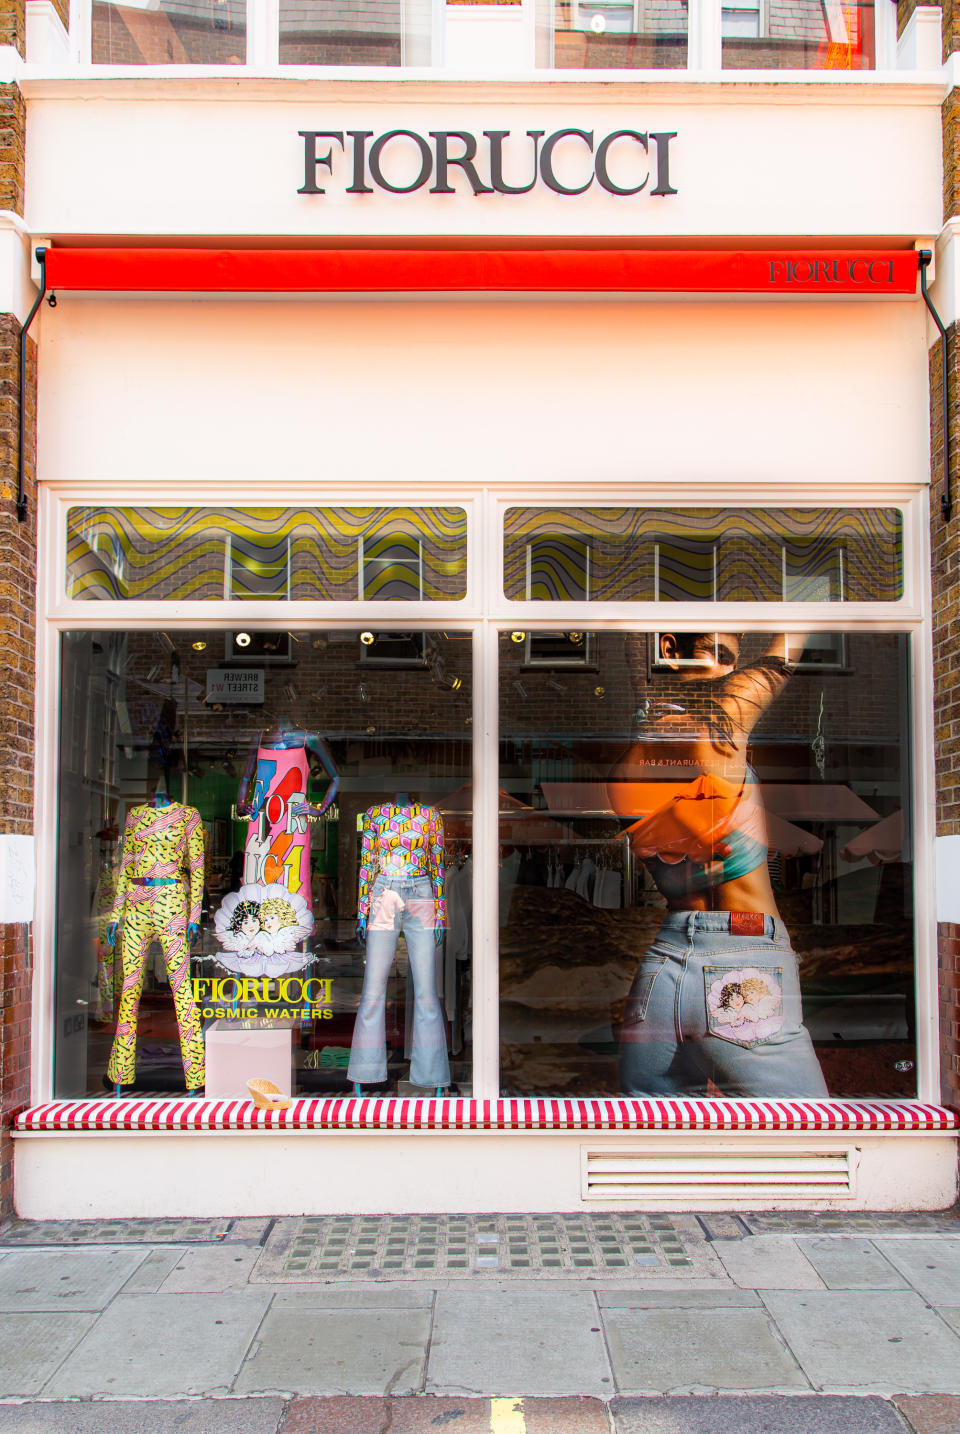 The window of Fiorucci’s Summer Series pop-up. - Credit: Mathias Falcone/Courtesy